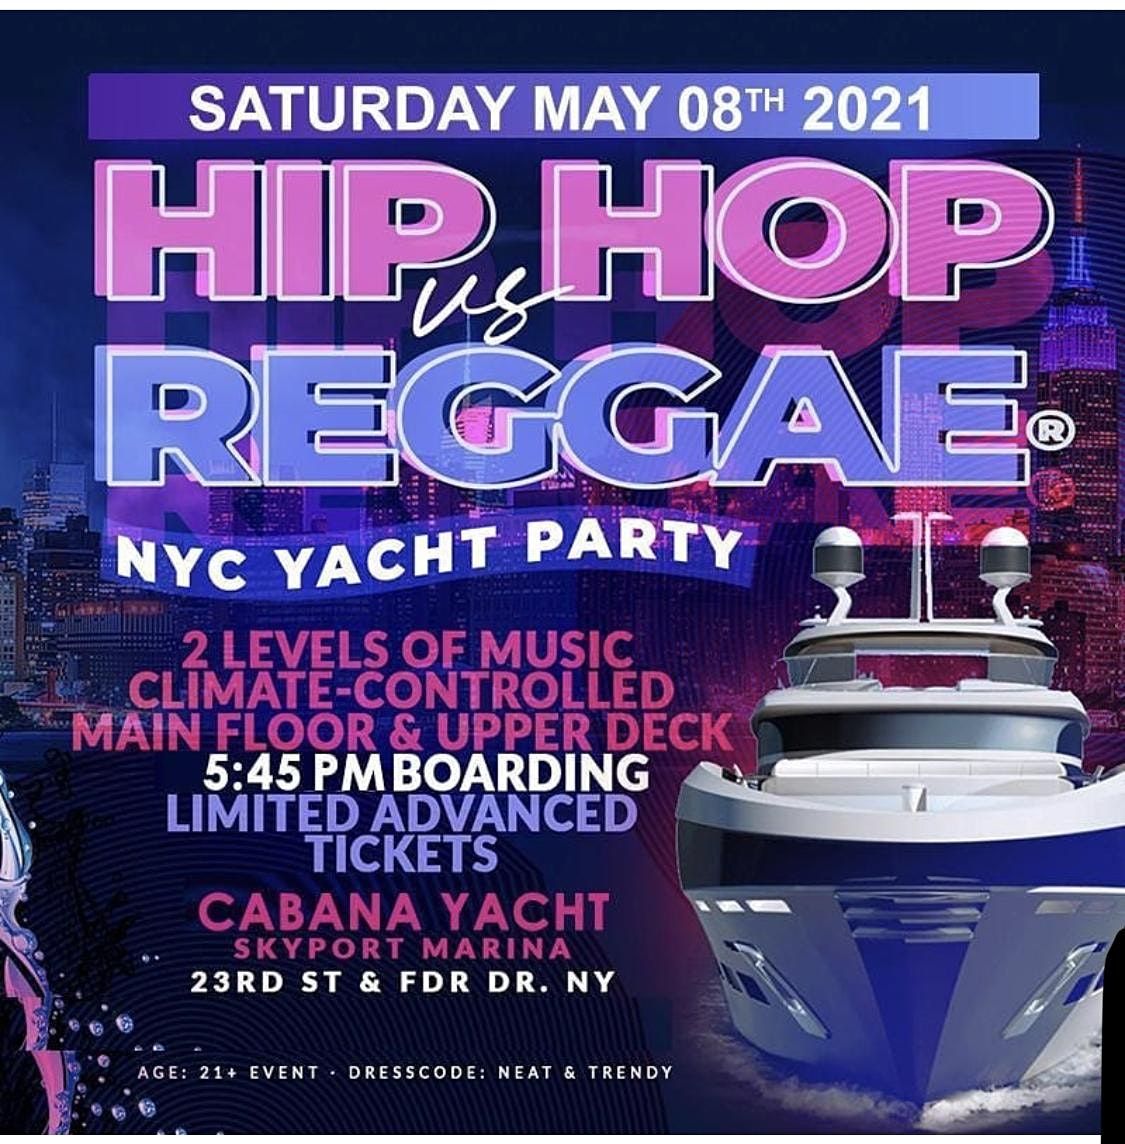 MIDNIGHT YACHT PARTY NYC! Sat., August 14th